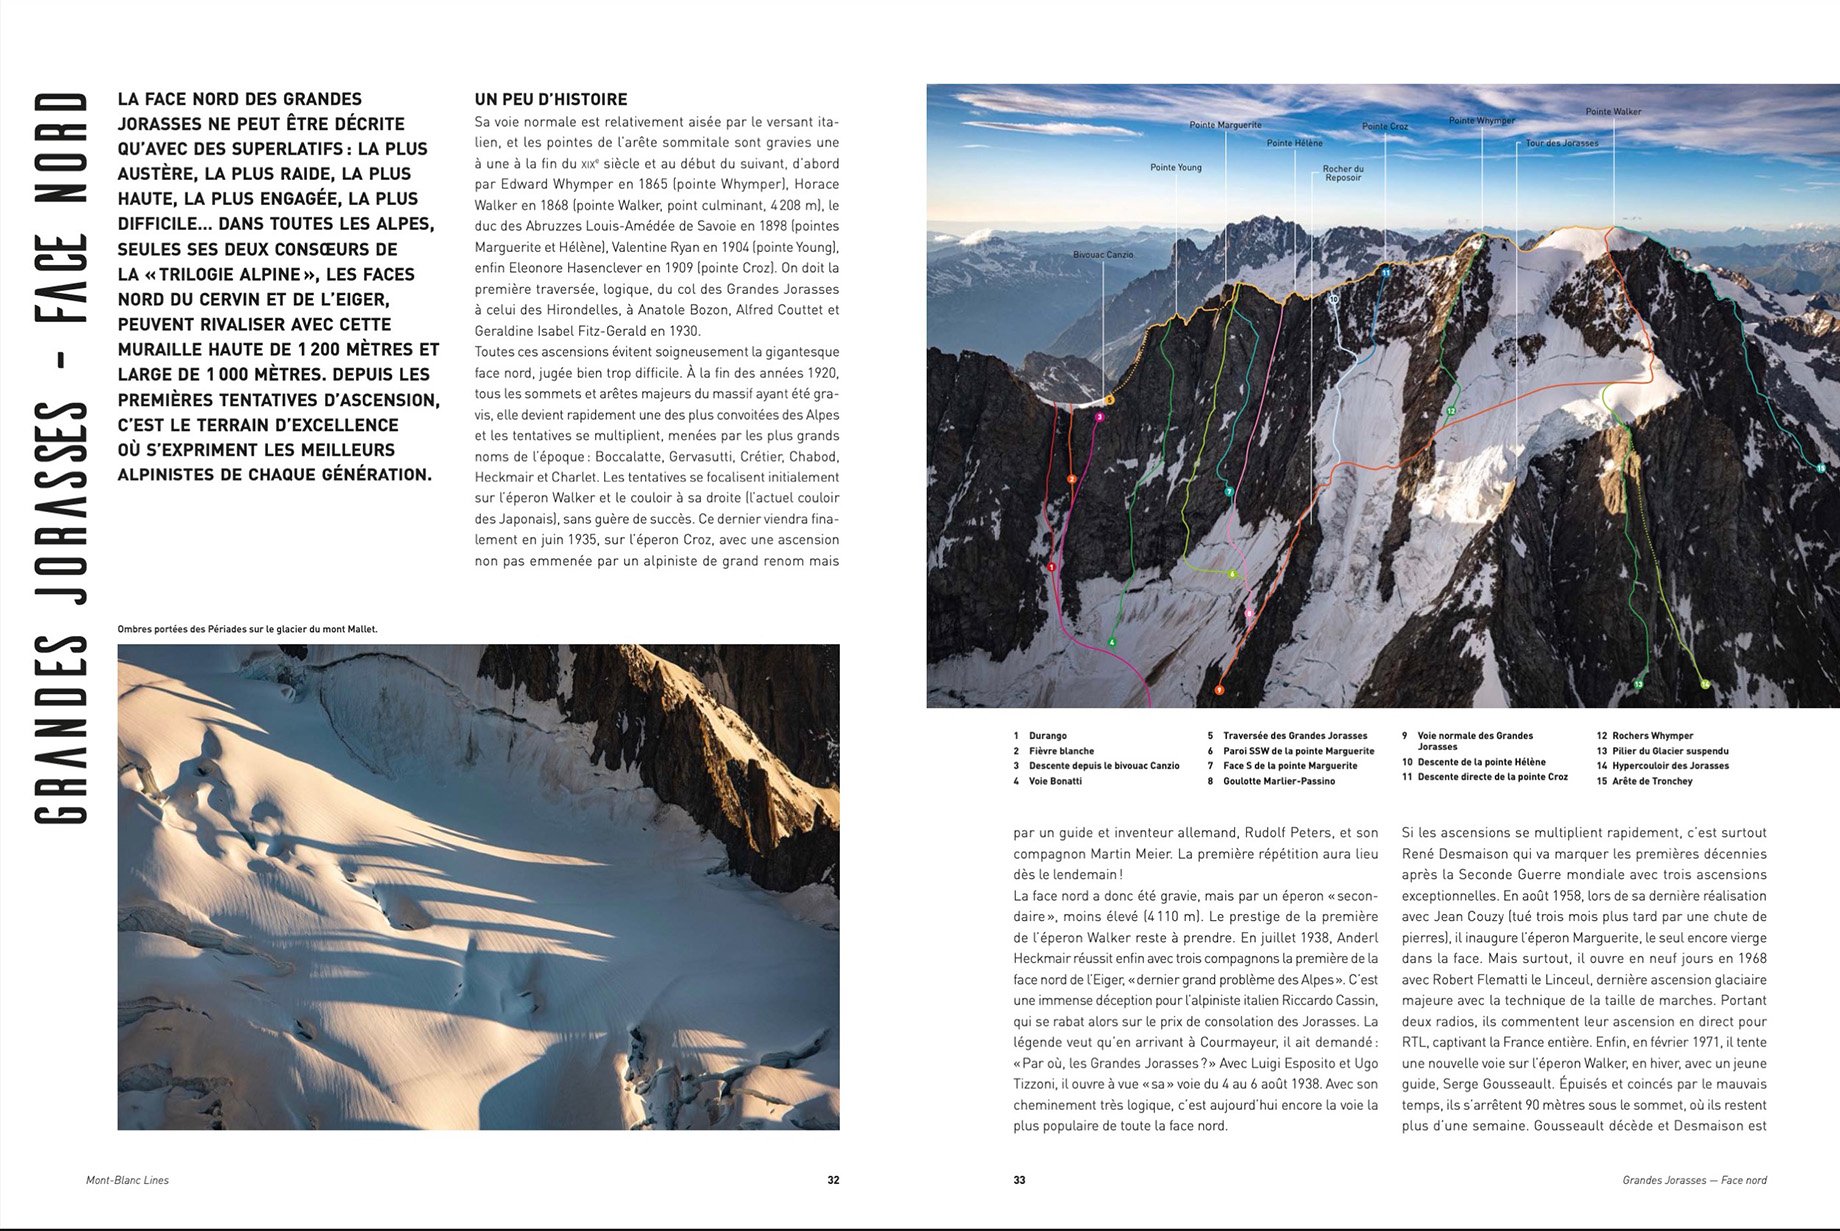 Tearsheet from Mont Blanc Lines coffee table book shot by Alex Buisse